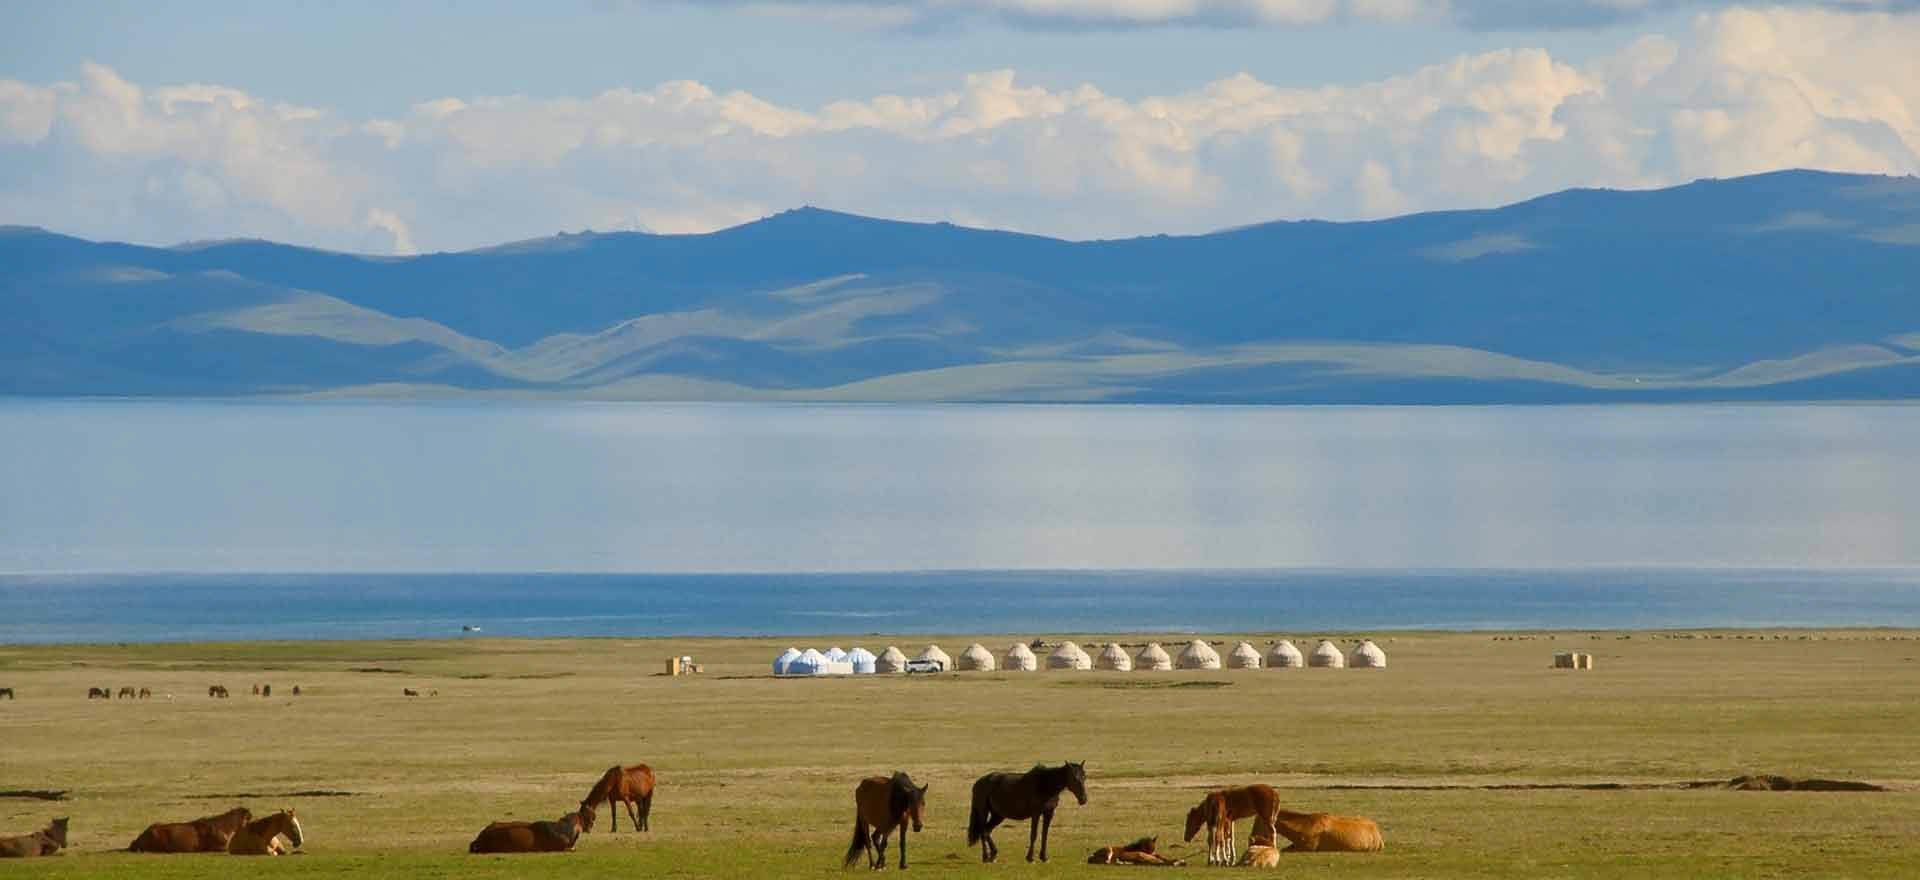 Horses grazing on the shores of Lake Issyk Kul - Kyrgyzstan Holidays and Tours